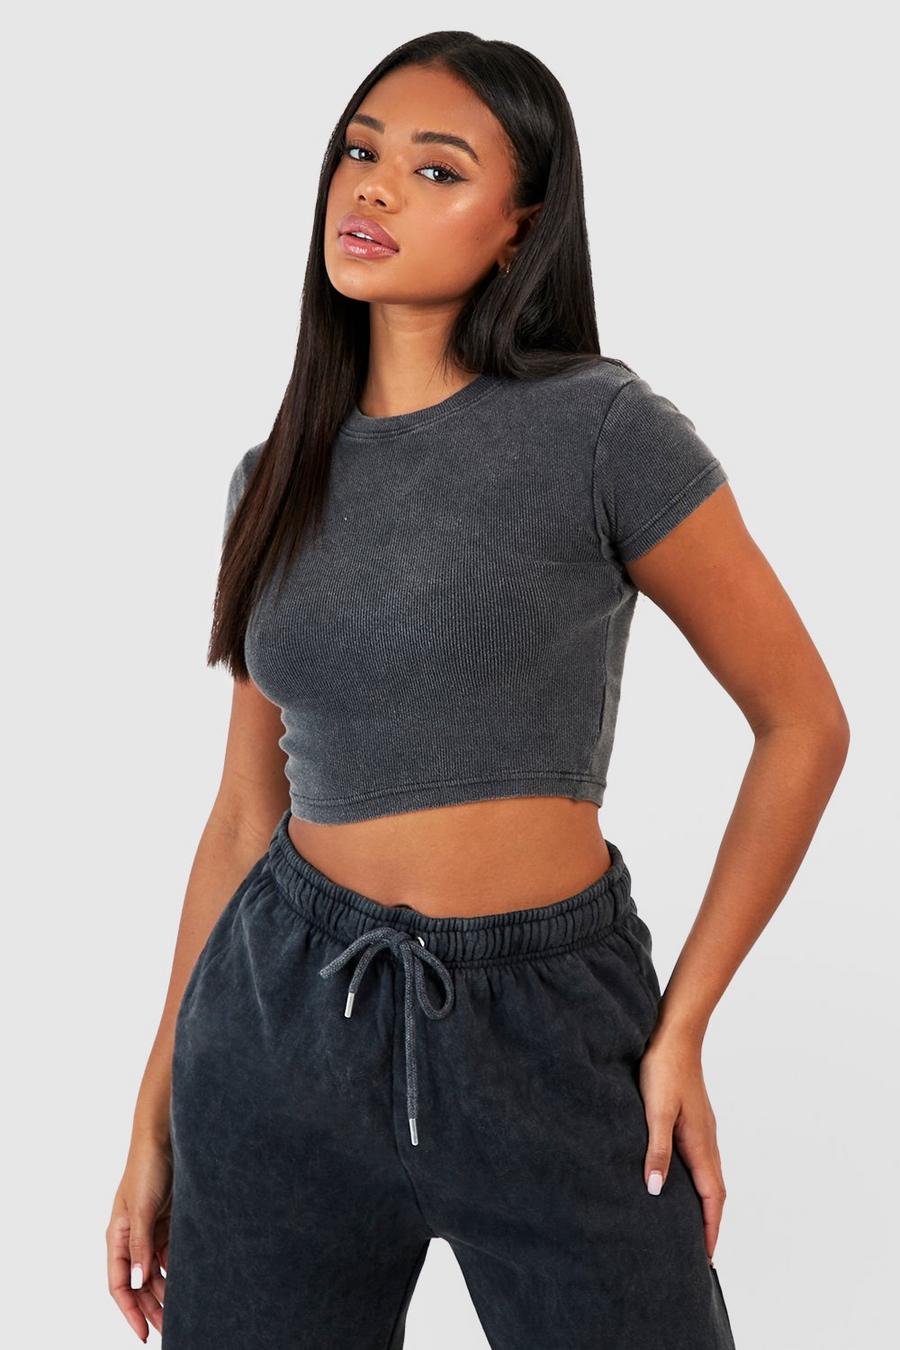 Charcoal grey Washed Rib Short Sleeve Fitted Top